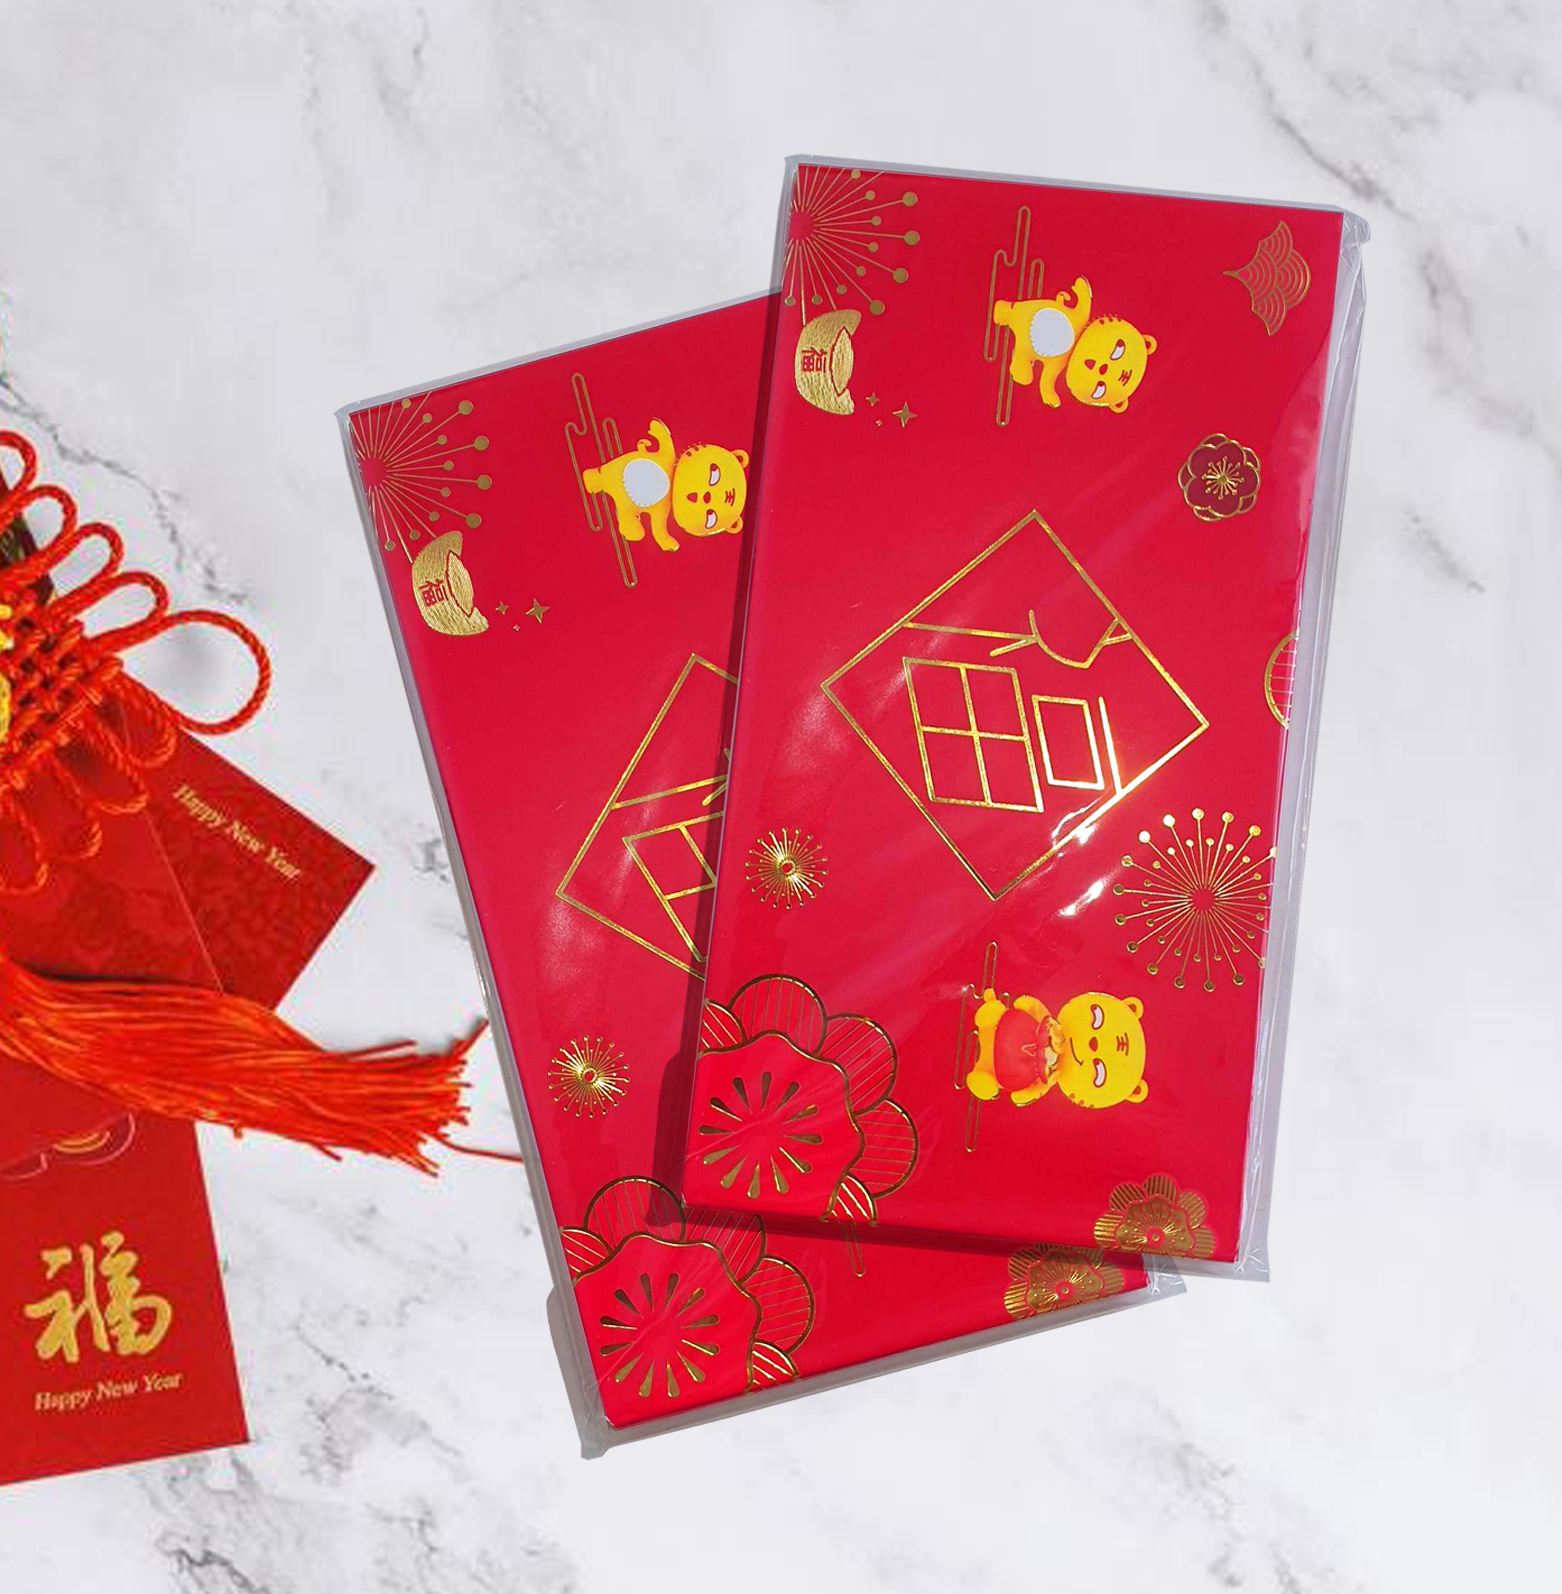 Effective Marketing: Branded Red Packets for Event Gifts